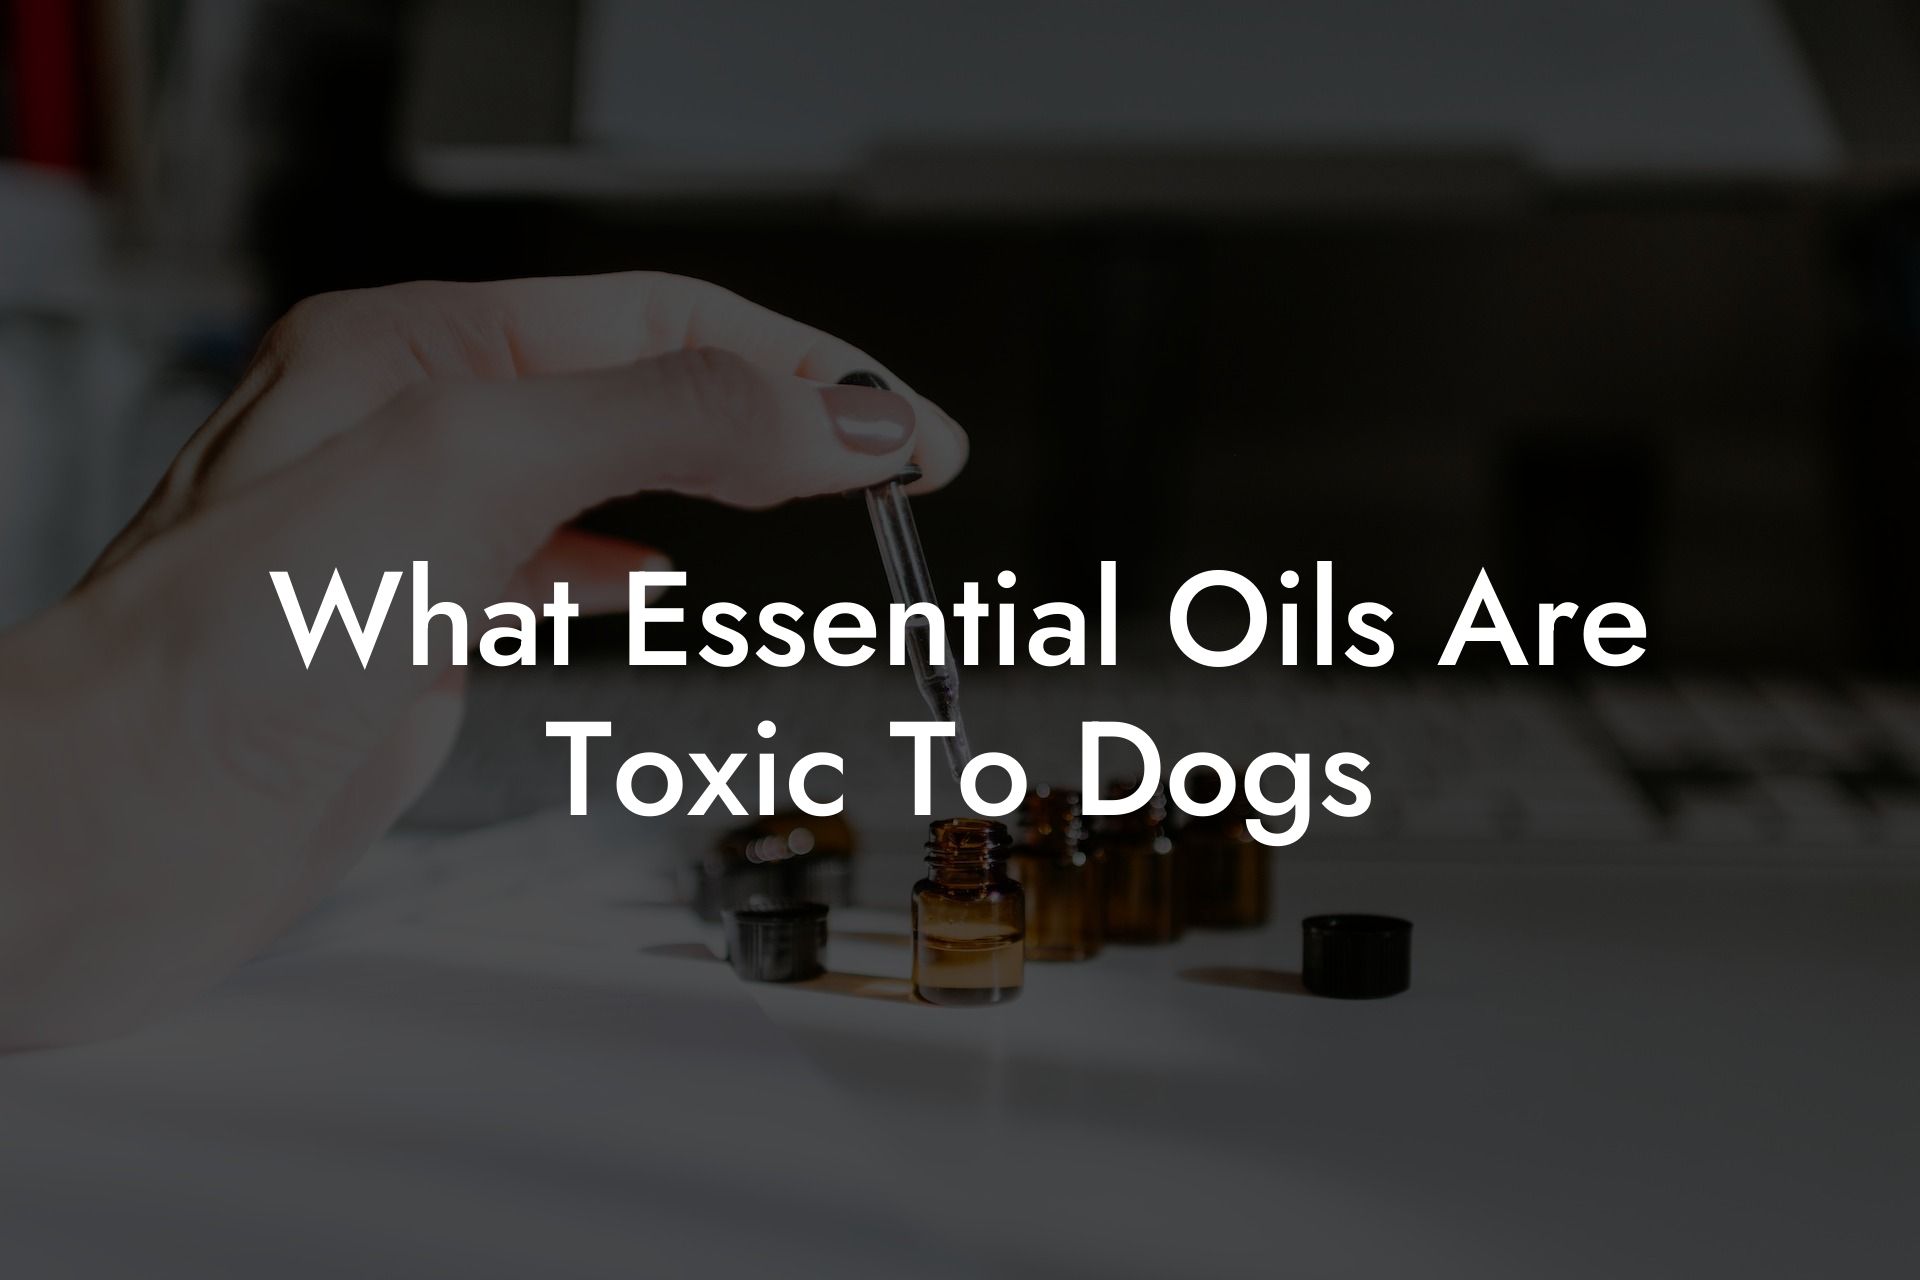 What Essential Oils Are Toxic To Dogs